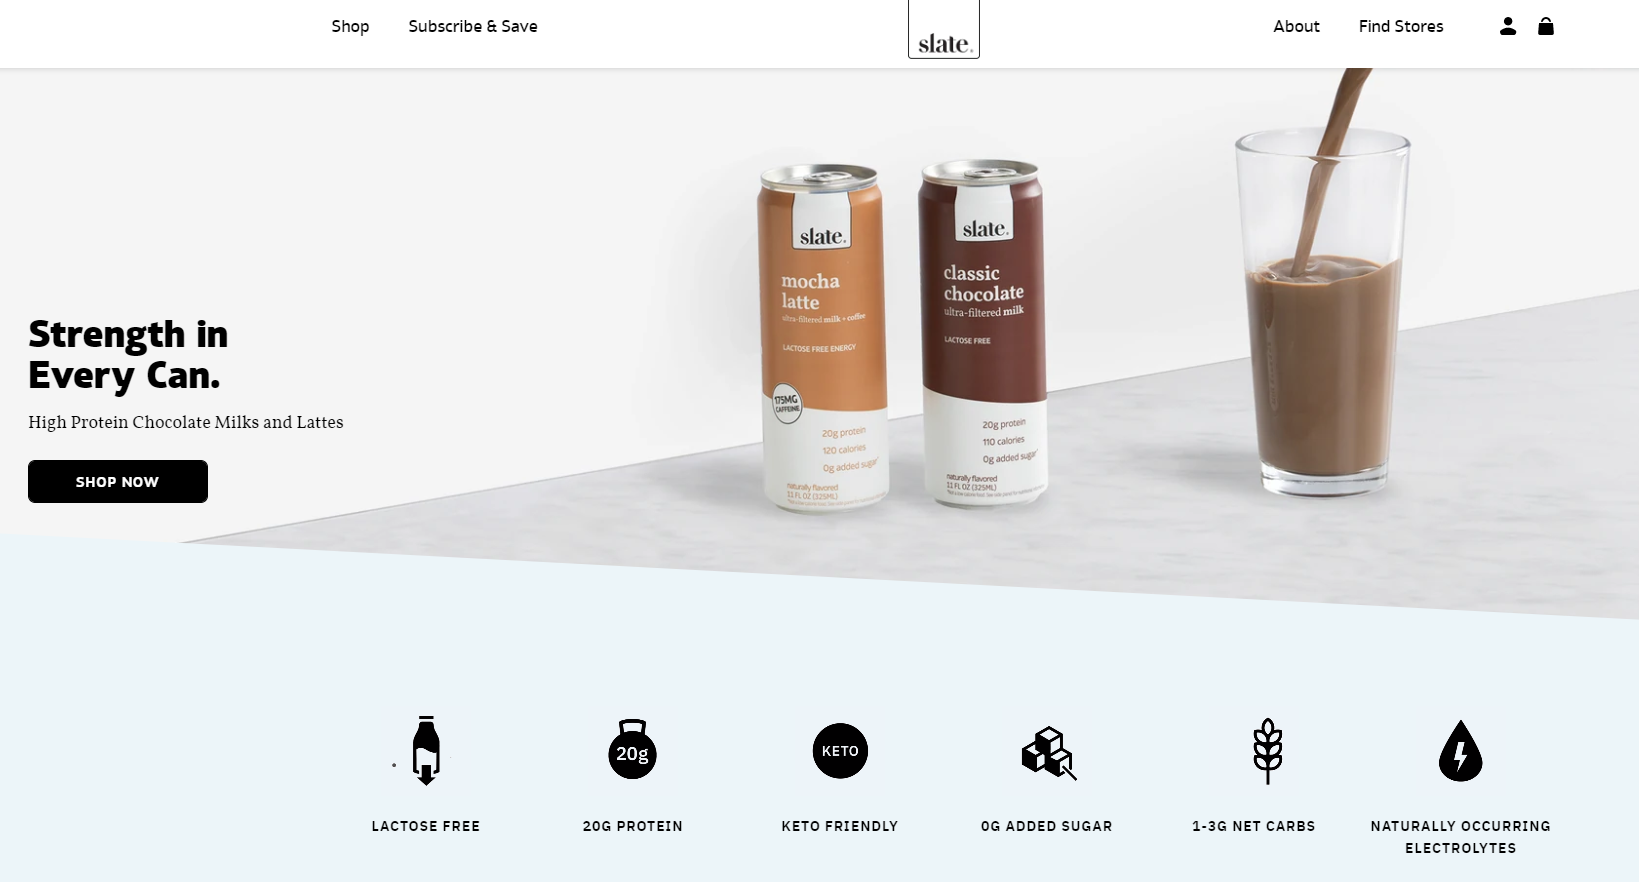 The Slate Milk website has good quality photos and icons that represent the product's features